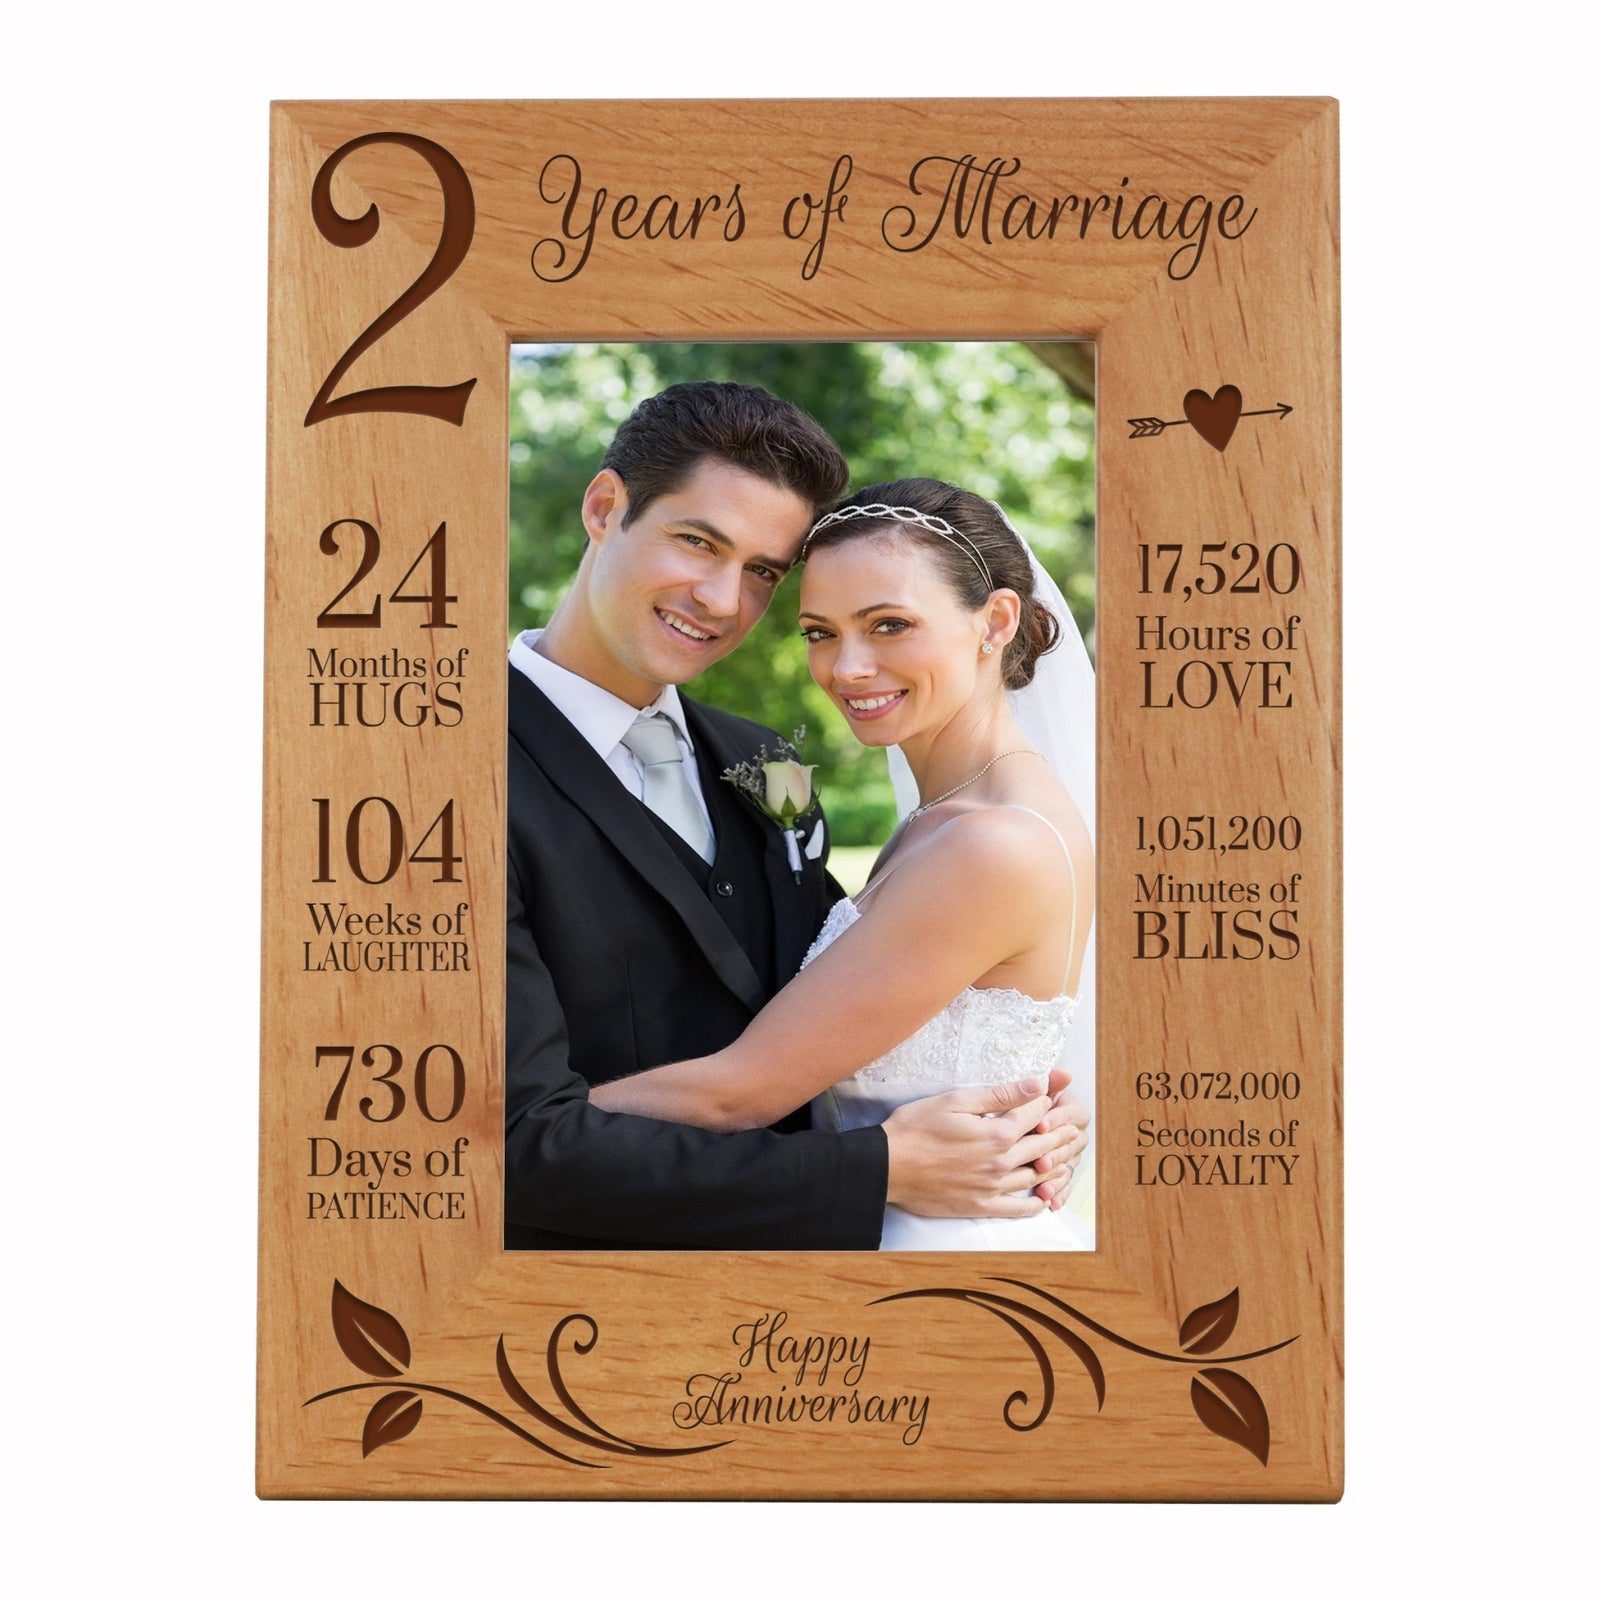 Lifesong Milestones Engraved 2nd Anniversary Picture Frame Gift for Couples